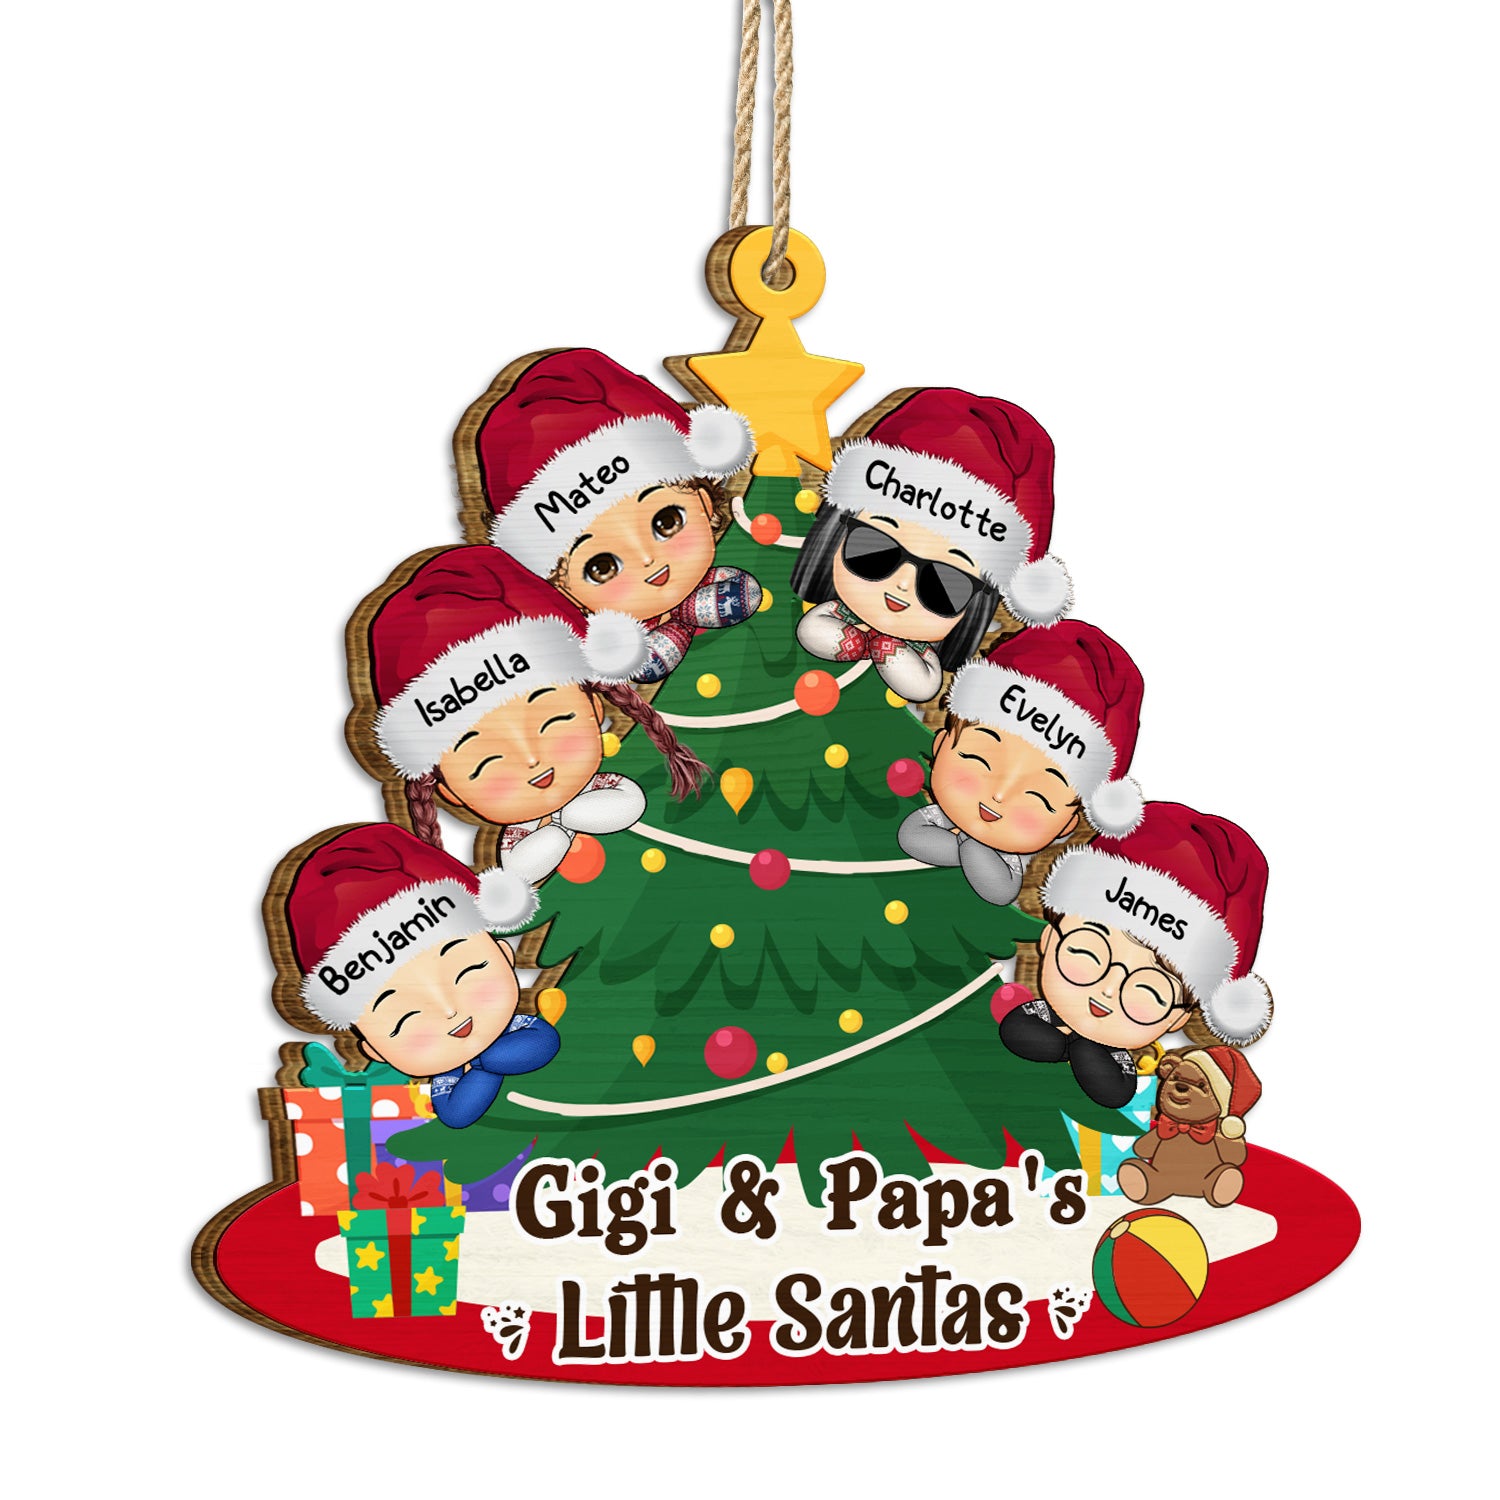 Gigi And Papa's Little Santa - Christmas Gift For Grandparents, Parents - Personalized Wooden Cutout Ornament